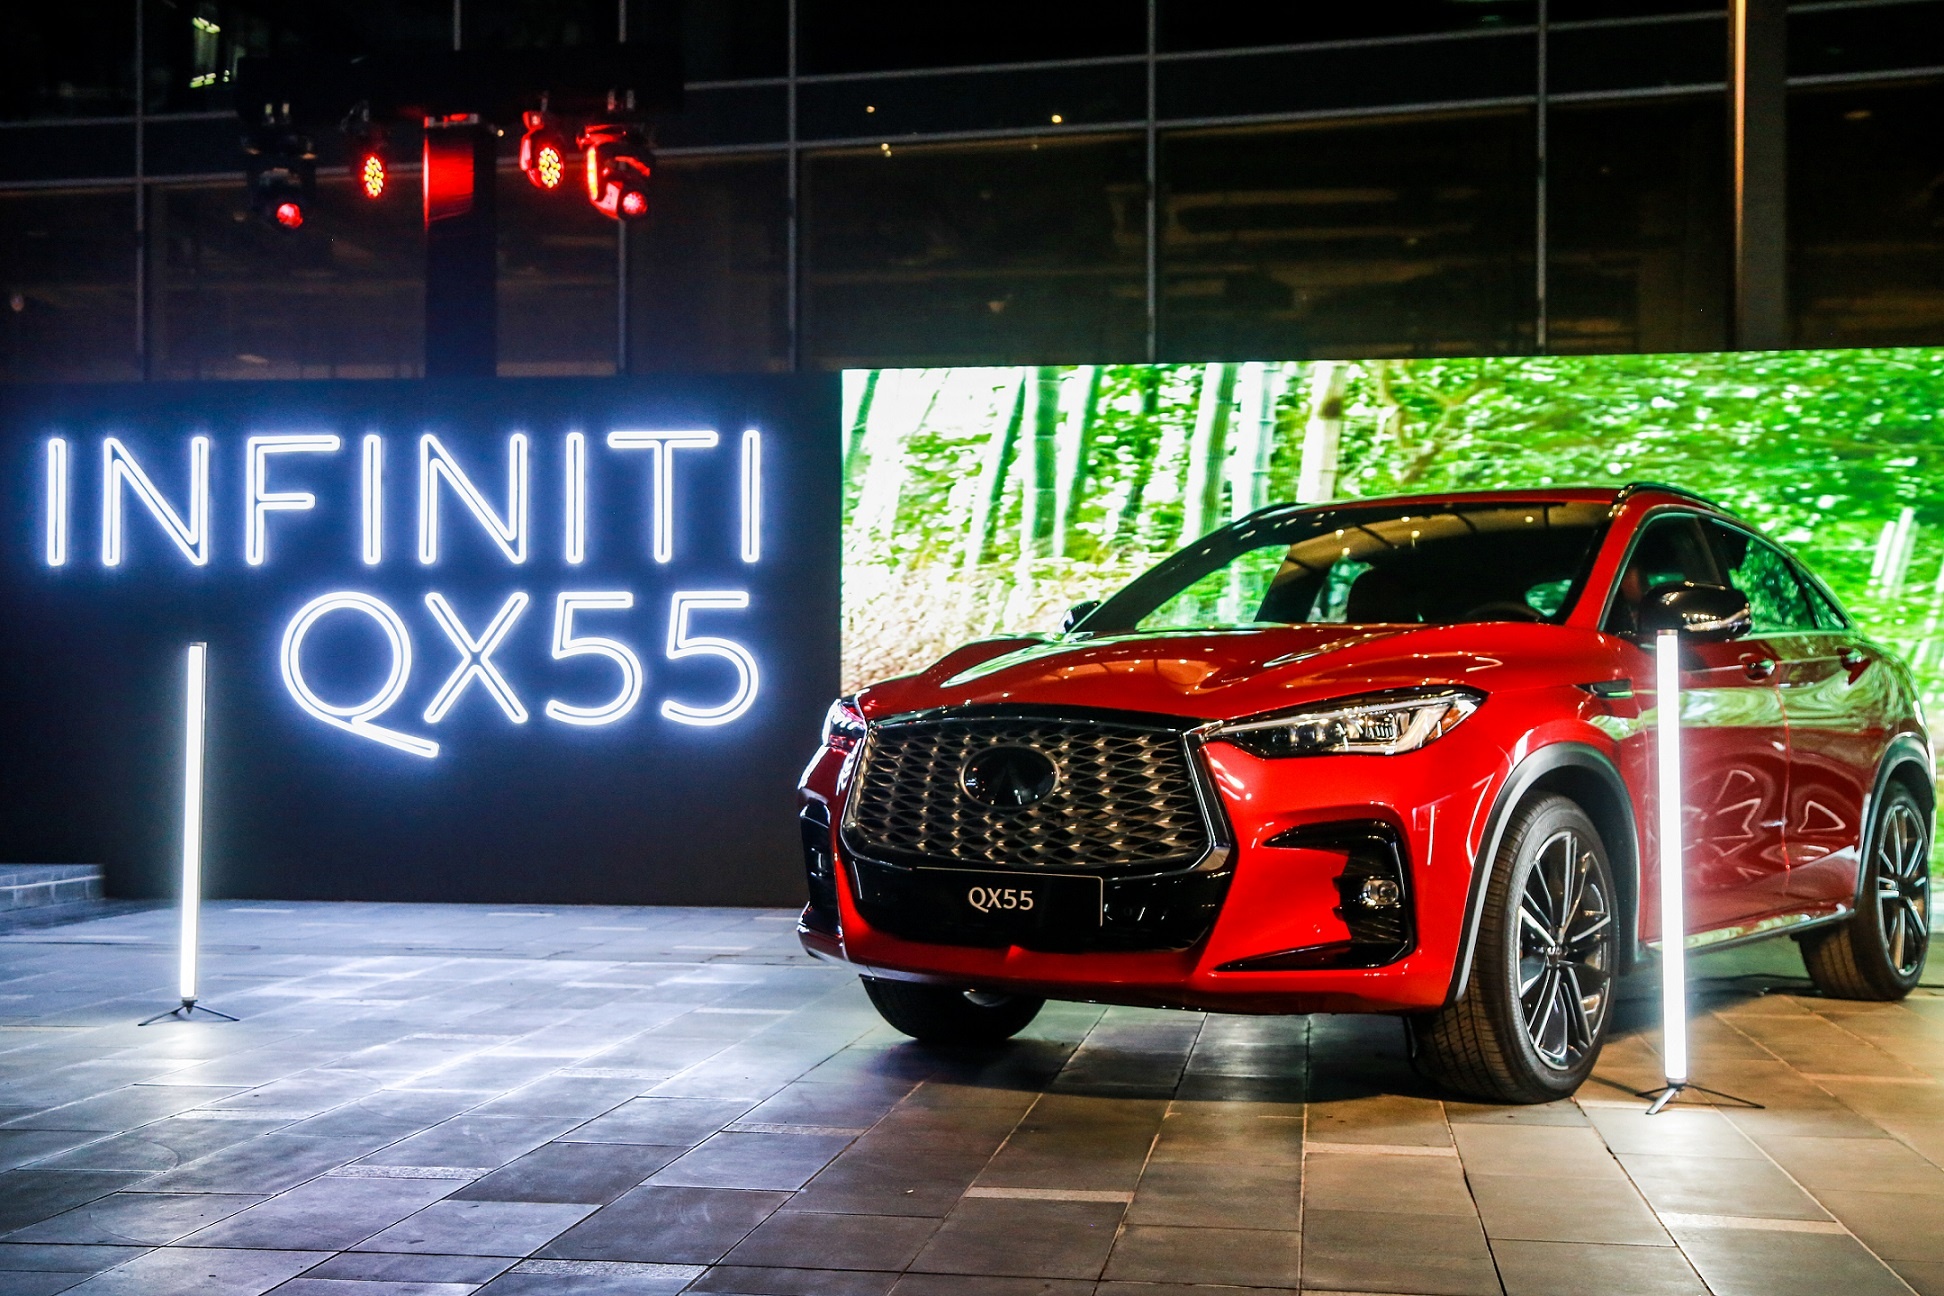 The all-new INFINITI QX55 makes its official Middle East debut